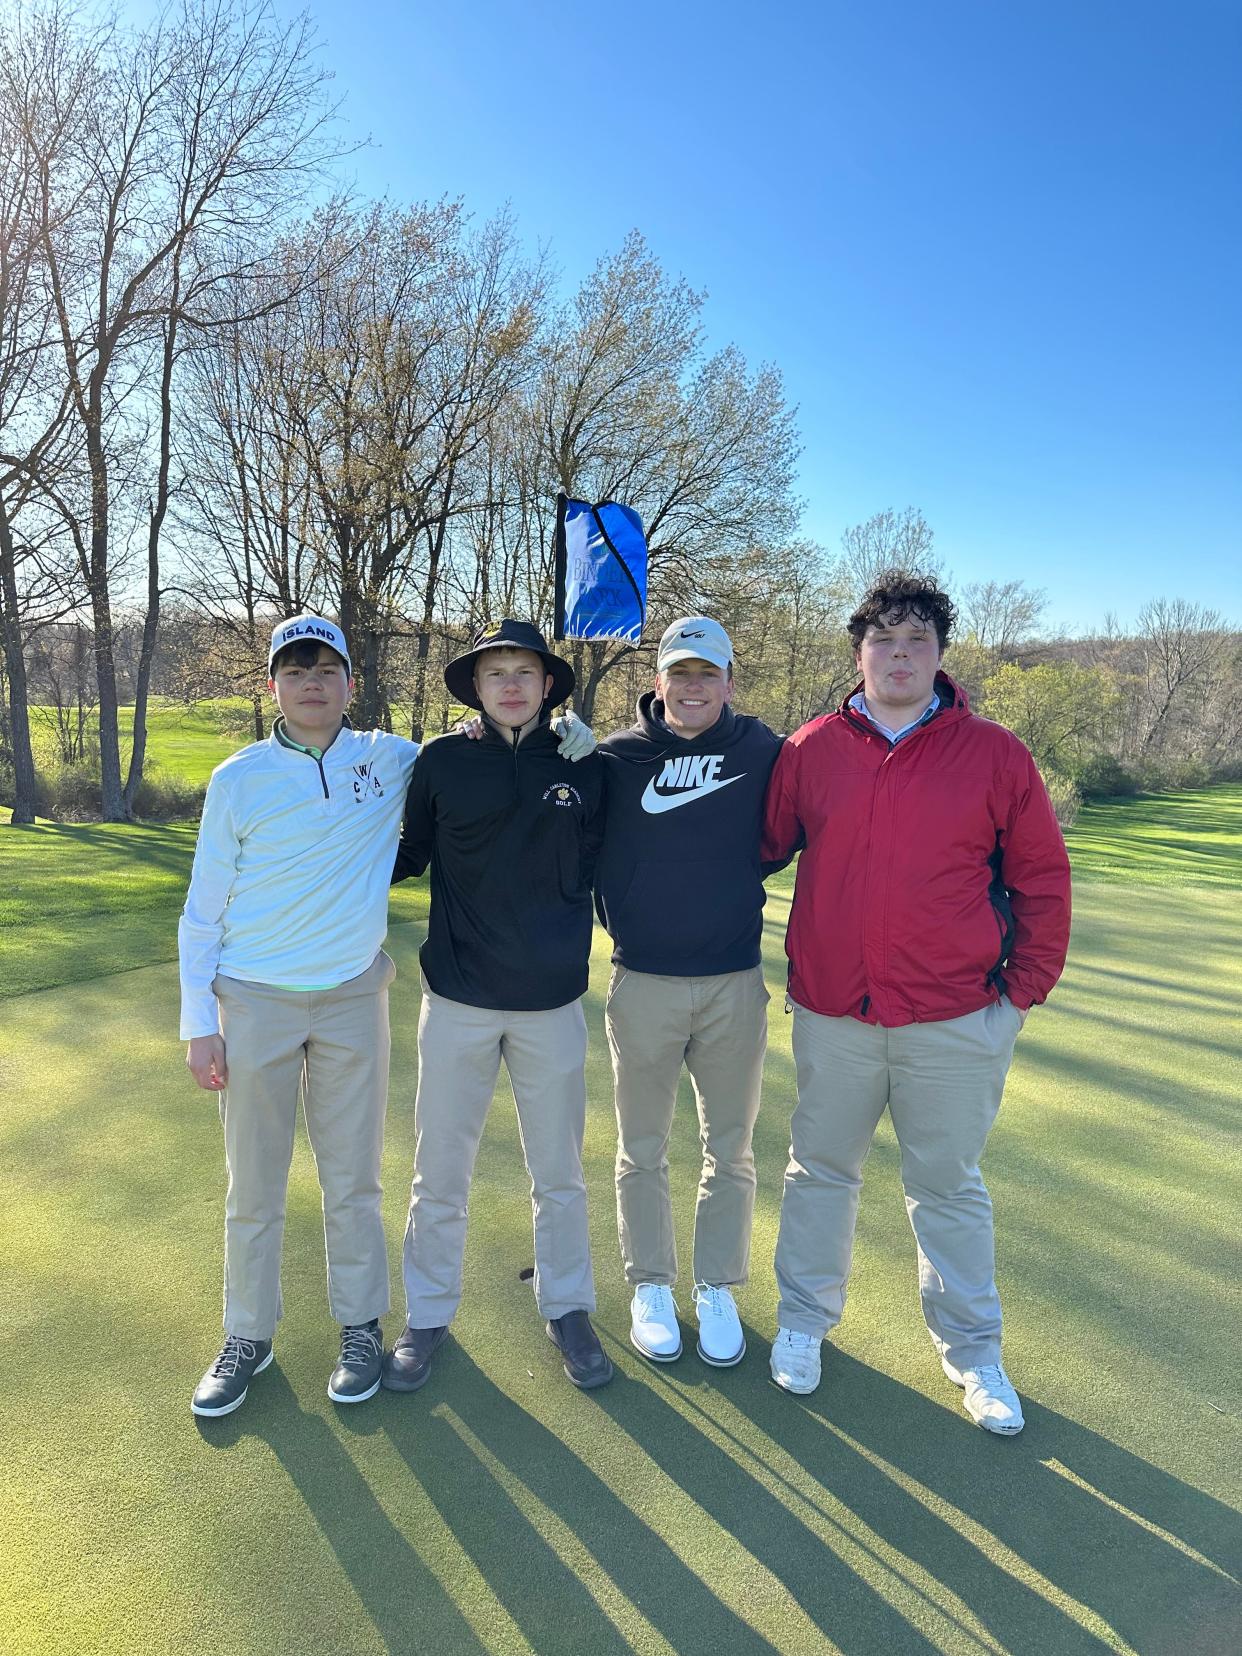 Hillsdale Will Carleton Academy golfers celebrate winning the CAC early season championship. (Pictured): David Maier, Thomas Maier, Will Thielen and Tyler Slade.